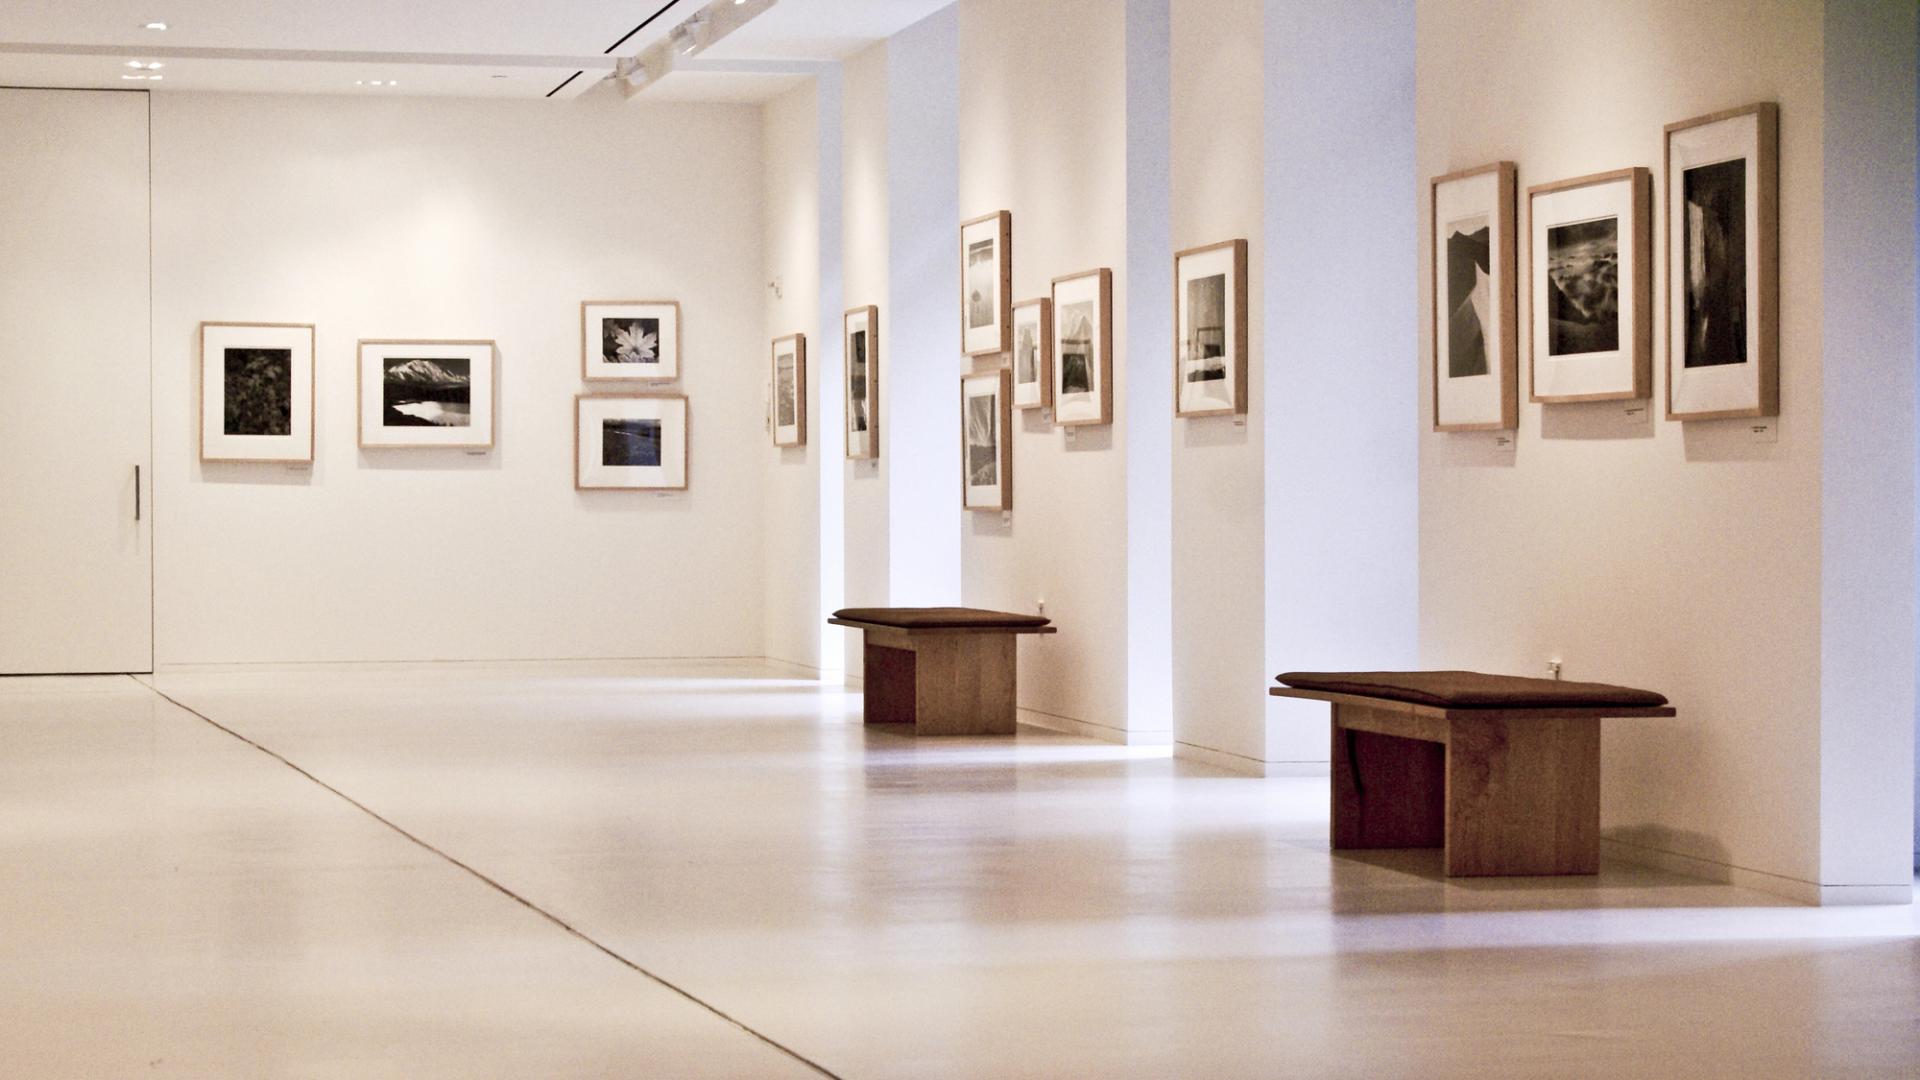 Galleries for Hire in Central London